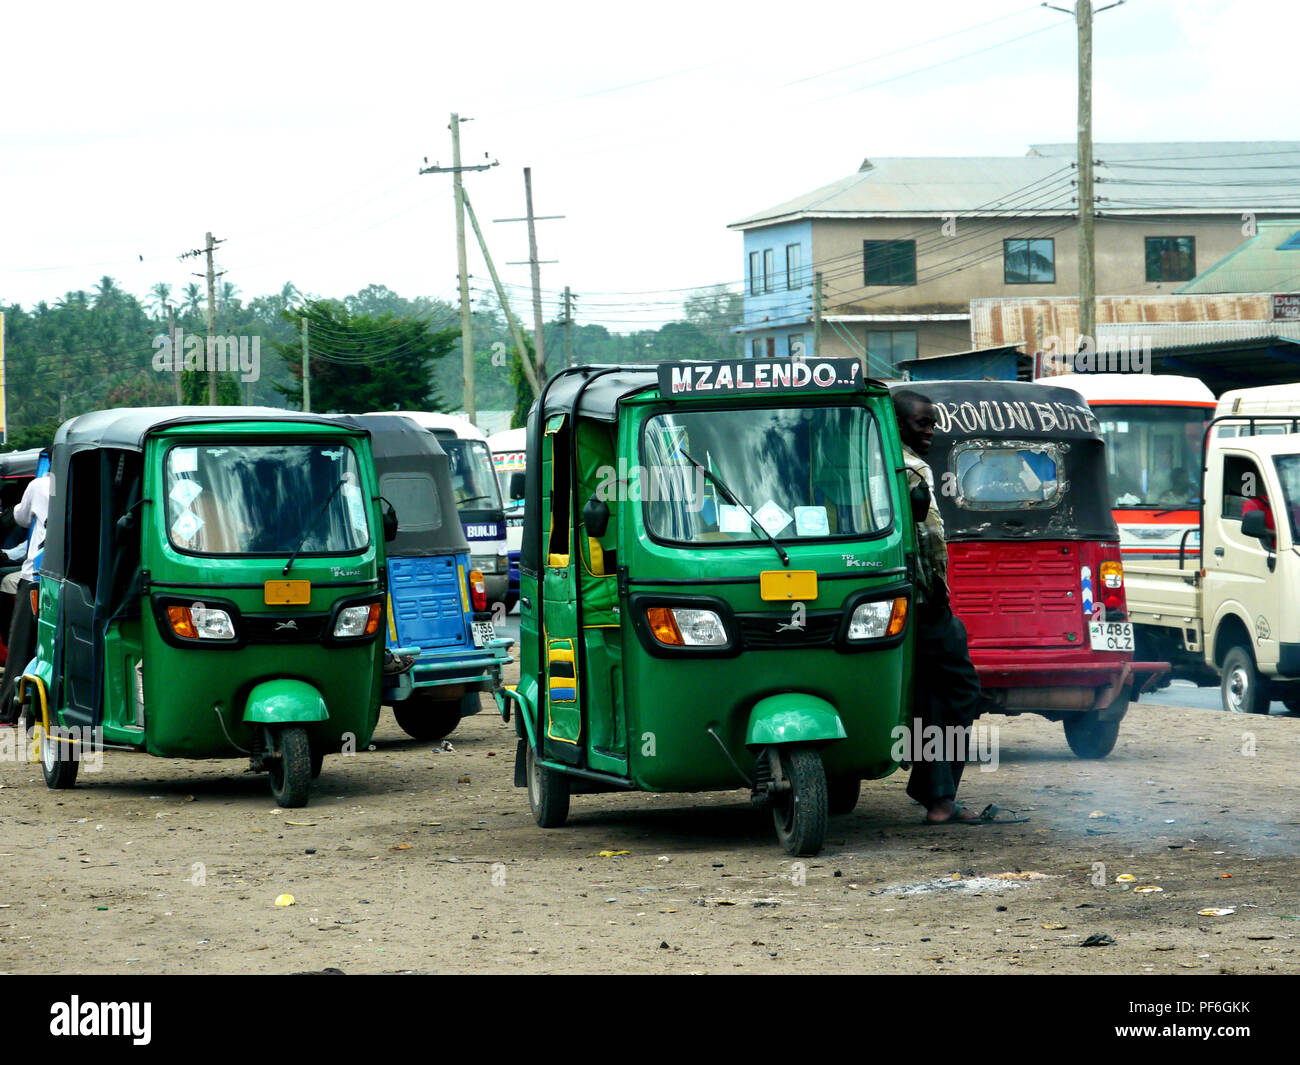 Tuk-tuk three wheeler taxis in a suburb of Dar es Salaam, the commercial capital of Tanzania, East Africa Stock Photo